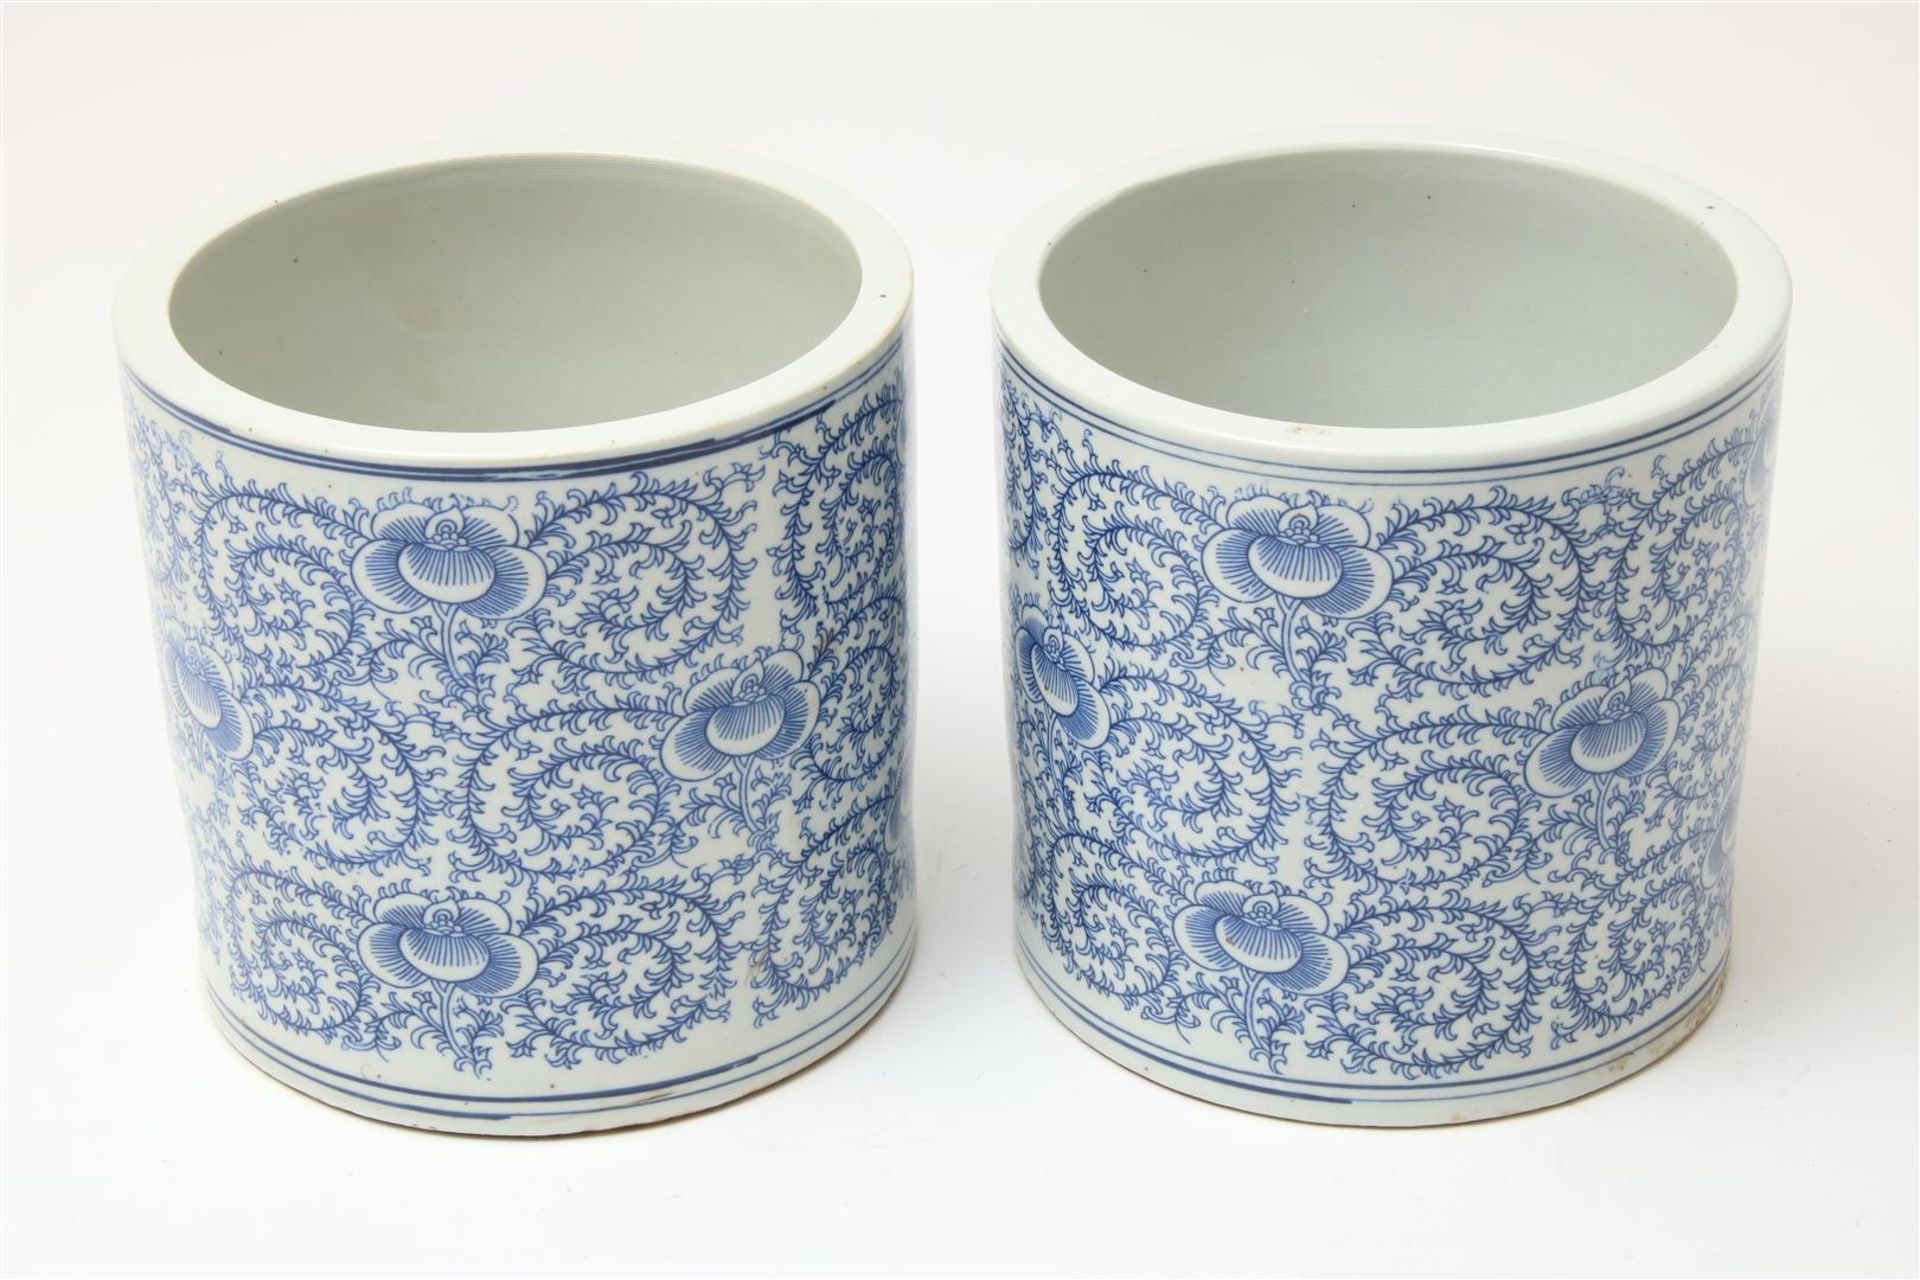 Set of blue and white porcelain pots decorated with flowers, China 20th century, h. 20 dia. 20.5 - Image 2 of 3